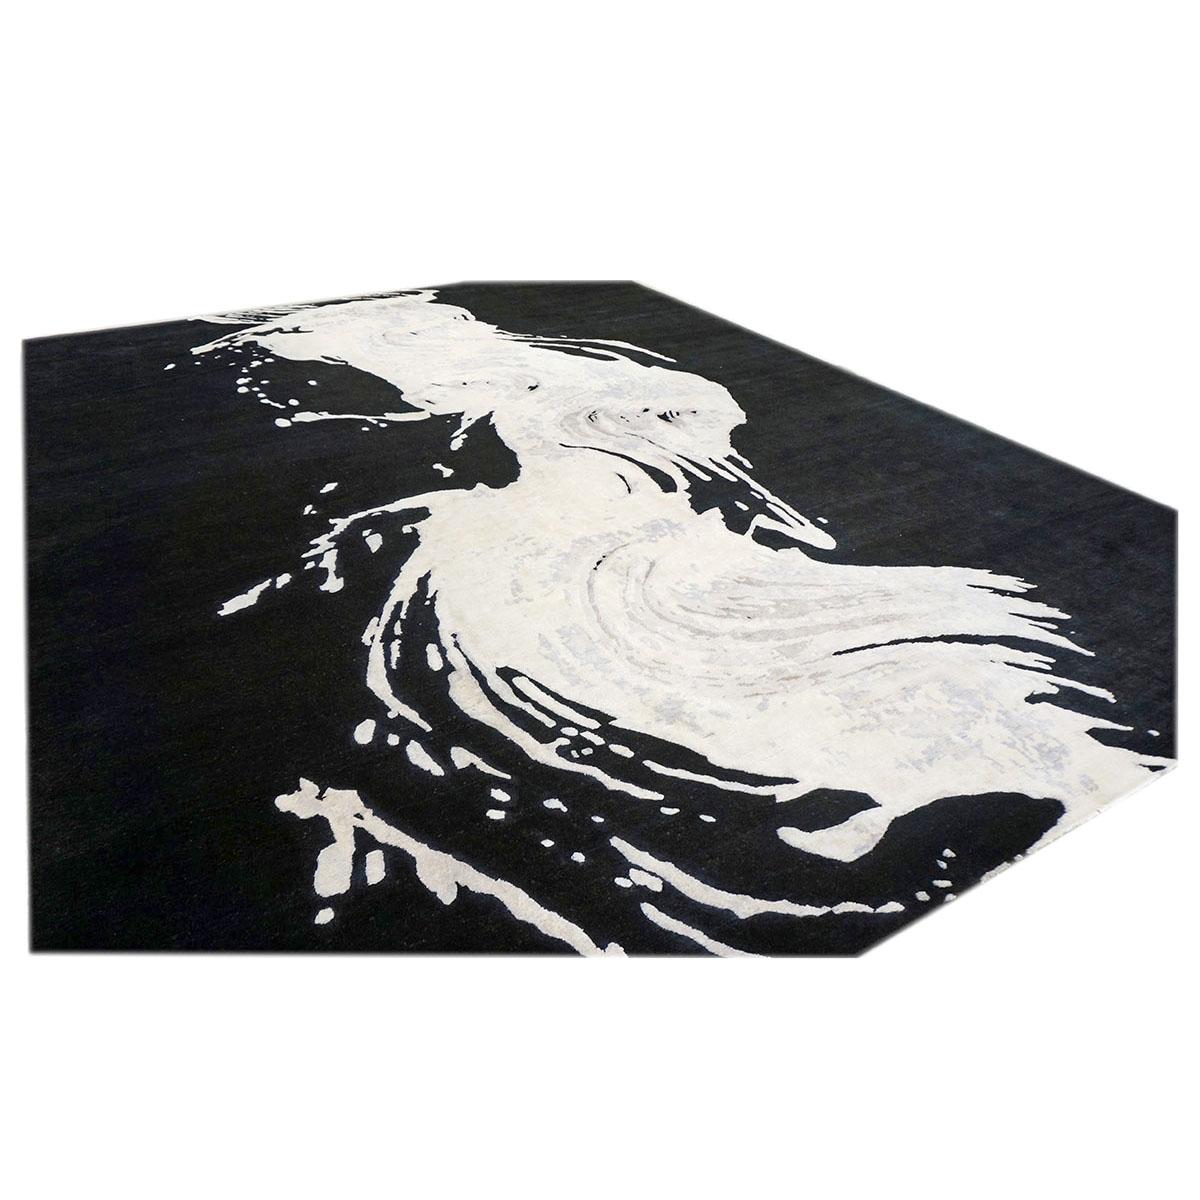 Ashly Fine Rugs presents a New Modern Inspired Wool & Silk 9x12 black & white wave handmade area rug with lustrous shiny fibers and a thick durable pile. This gorgeous collection has been designed by our in-house designer and handmade by the skilled